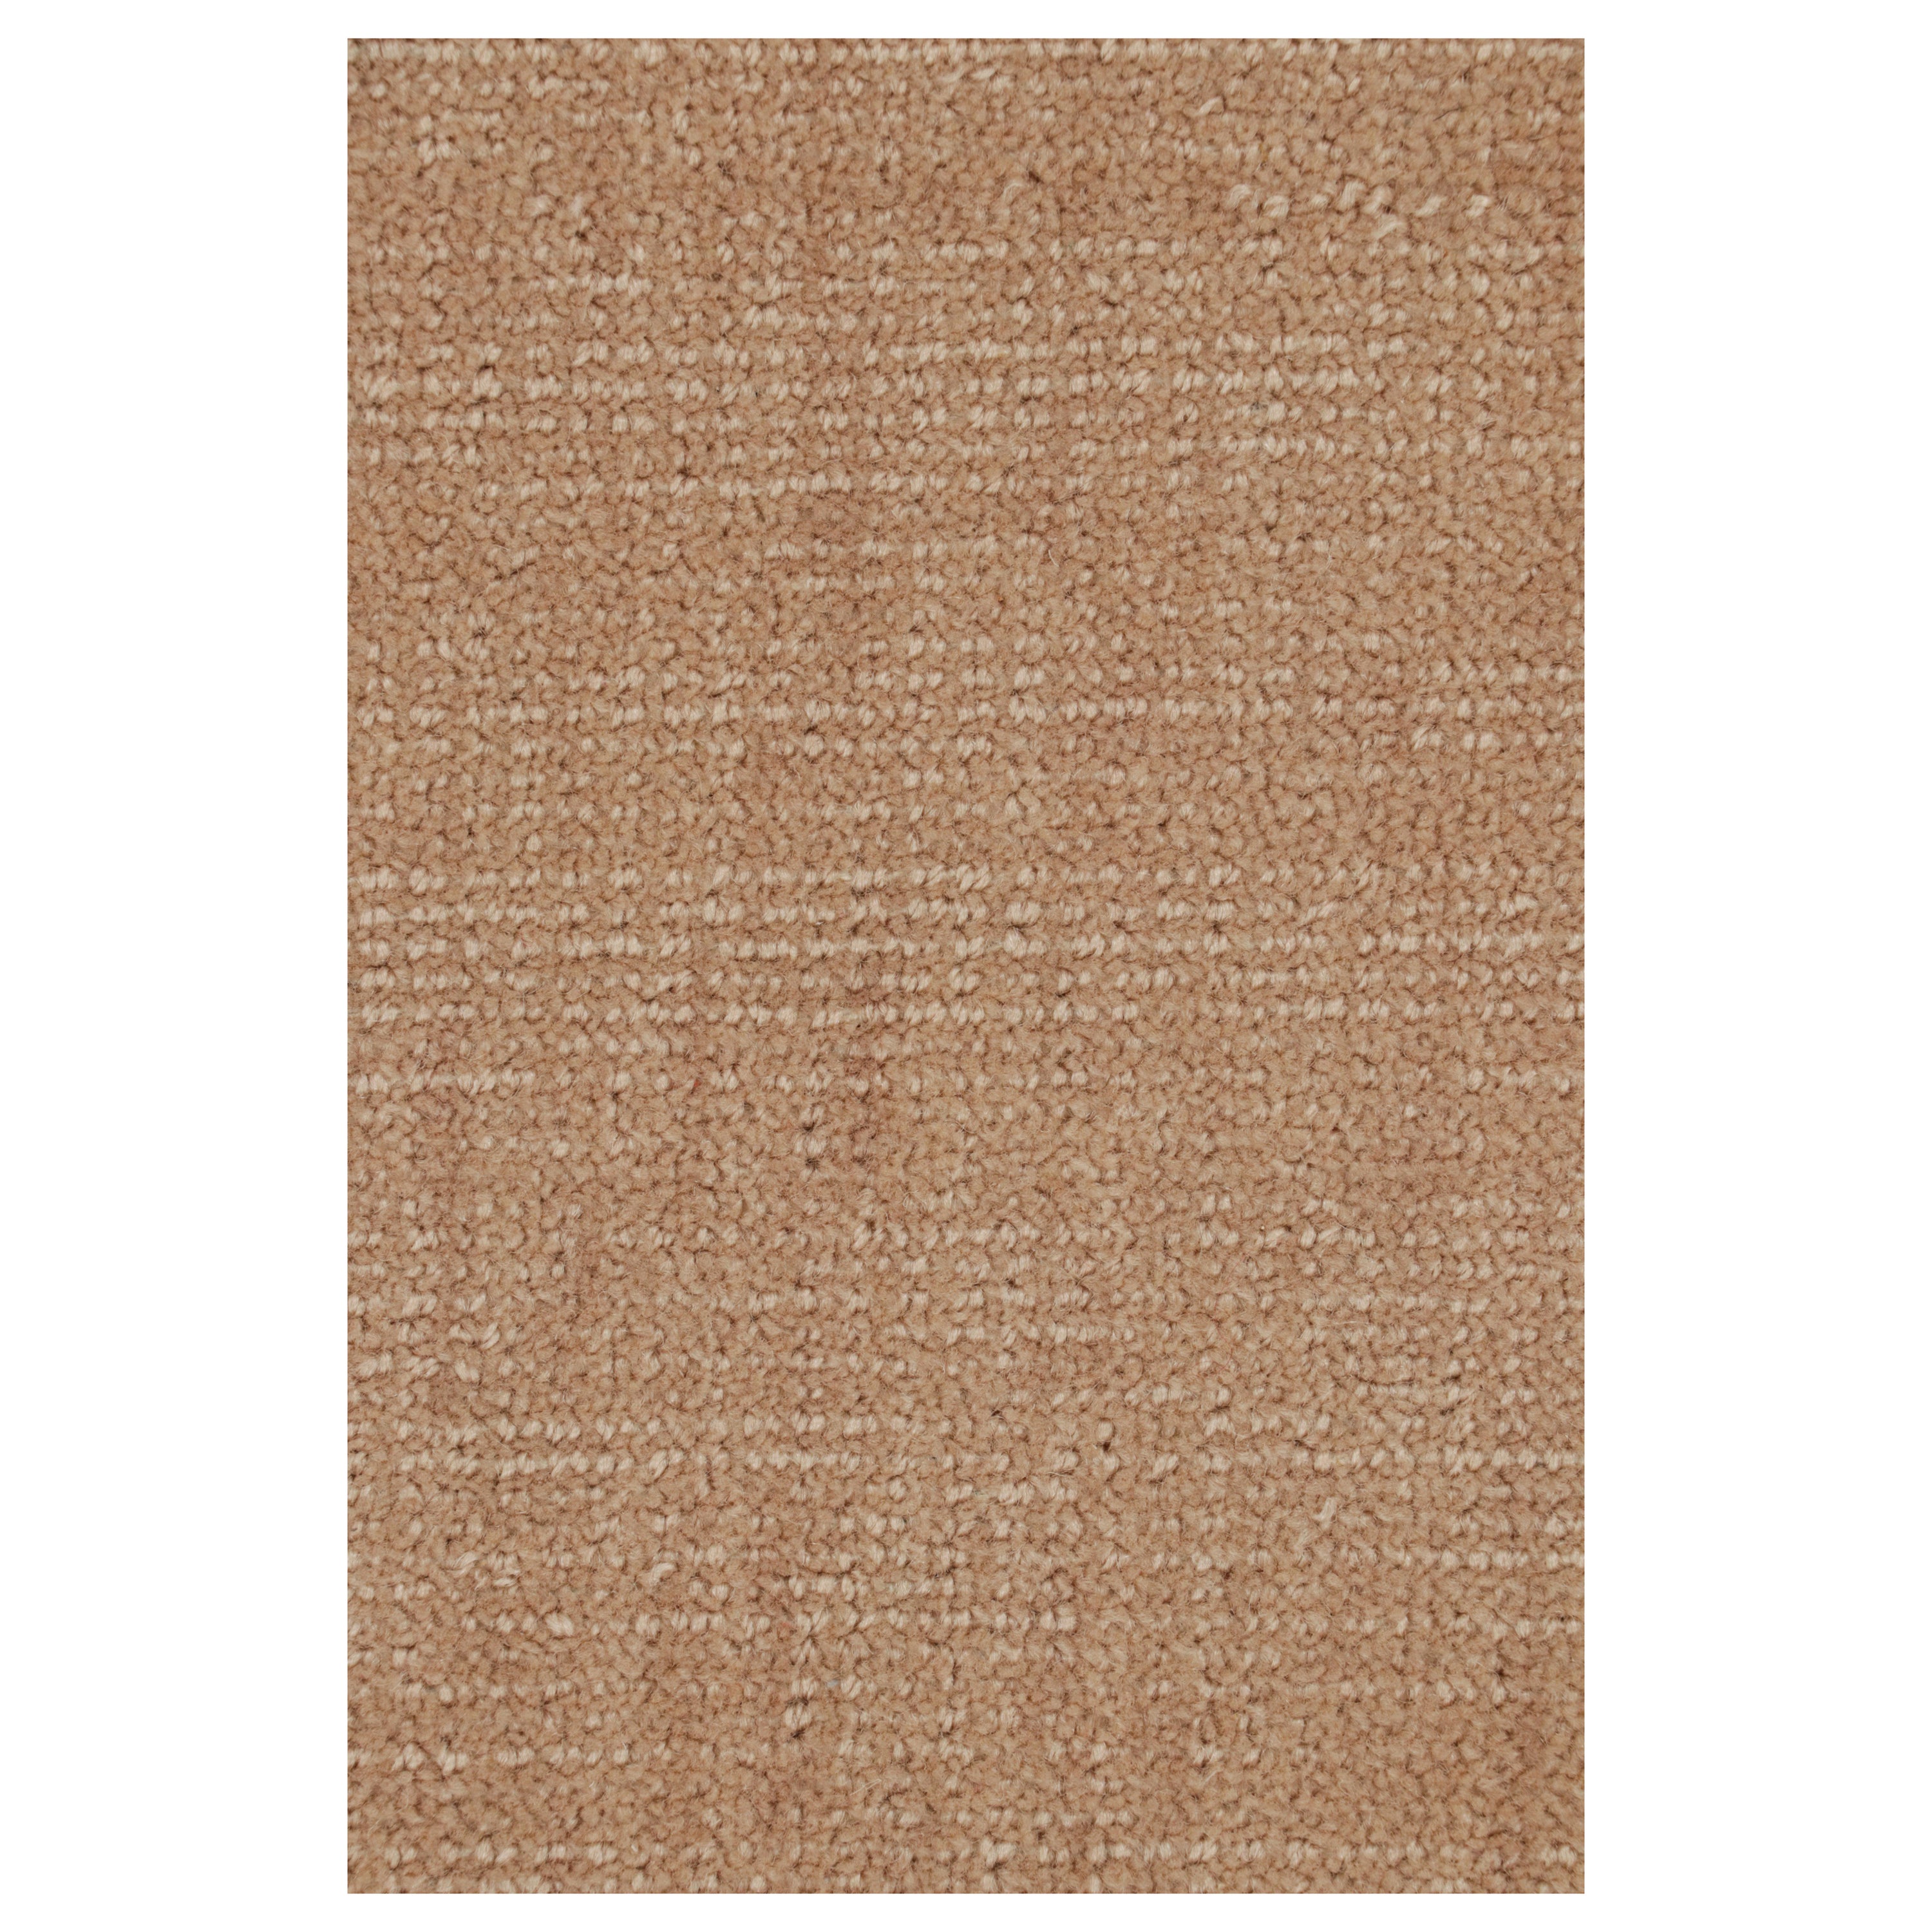 This 15x24 rug is a grand new entry to Rug & Kilim’s Modern rug collection. 

Made with all natural wool, this piece is from our new Light on Loom line, which includes quicker custom capabilities than ever before. This piece and others like it can